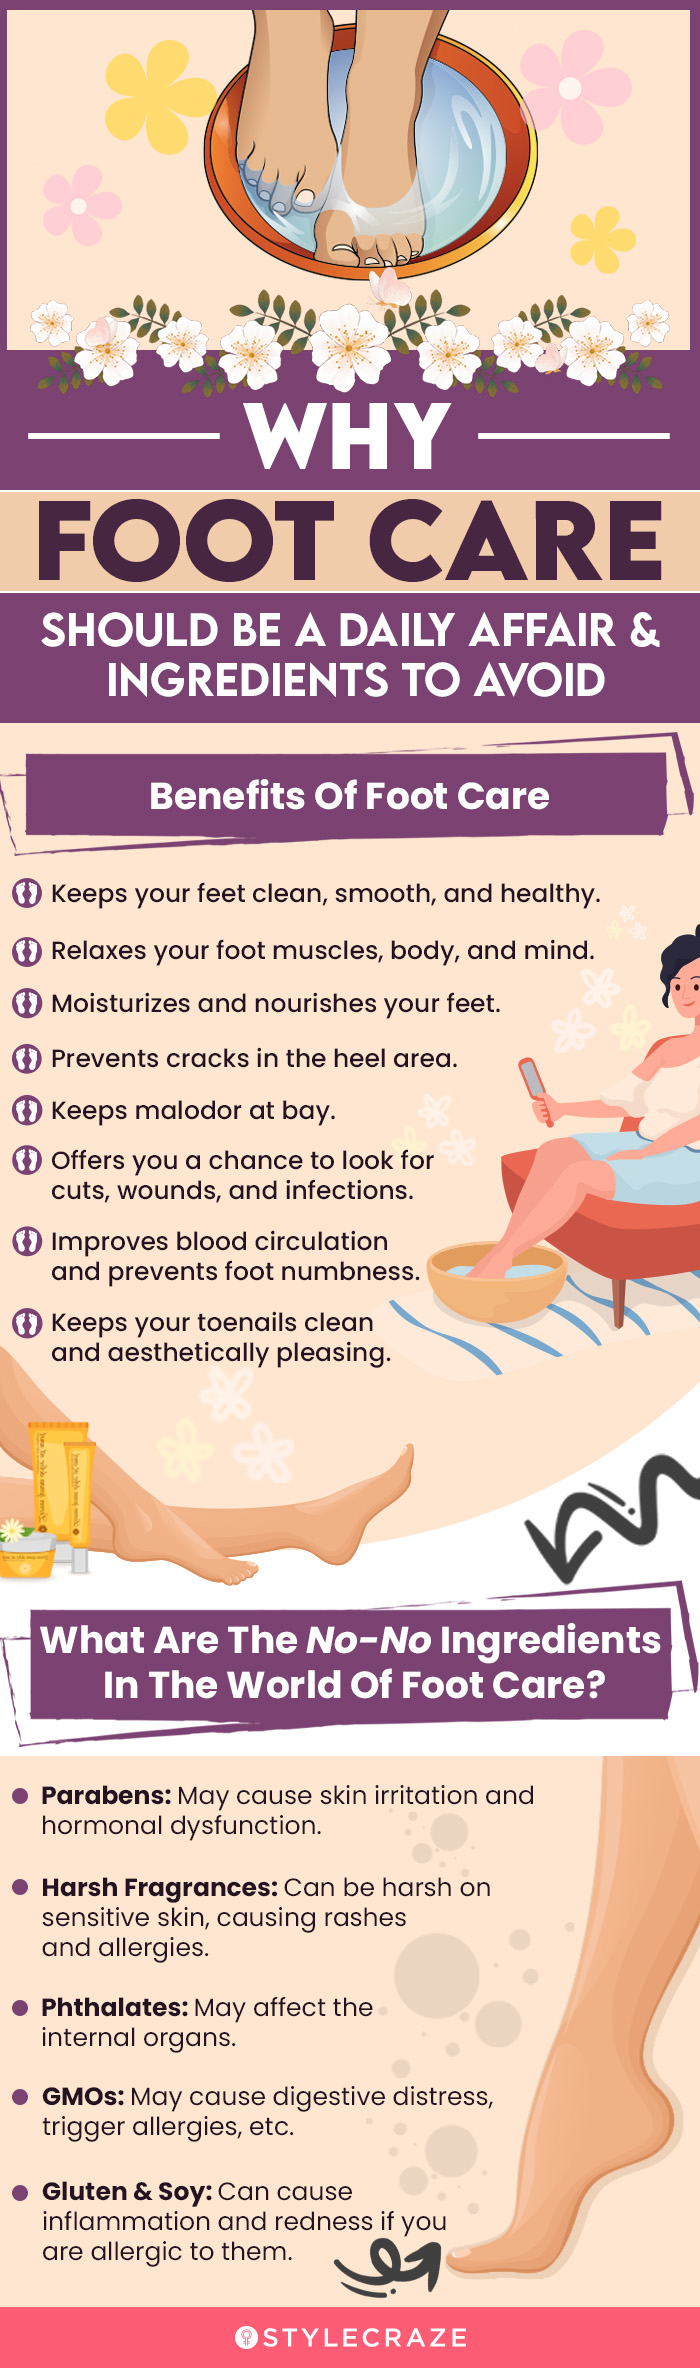 Why Foot Care Should Be A Daily Affair & Ingredients To Avoid [infographic]